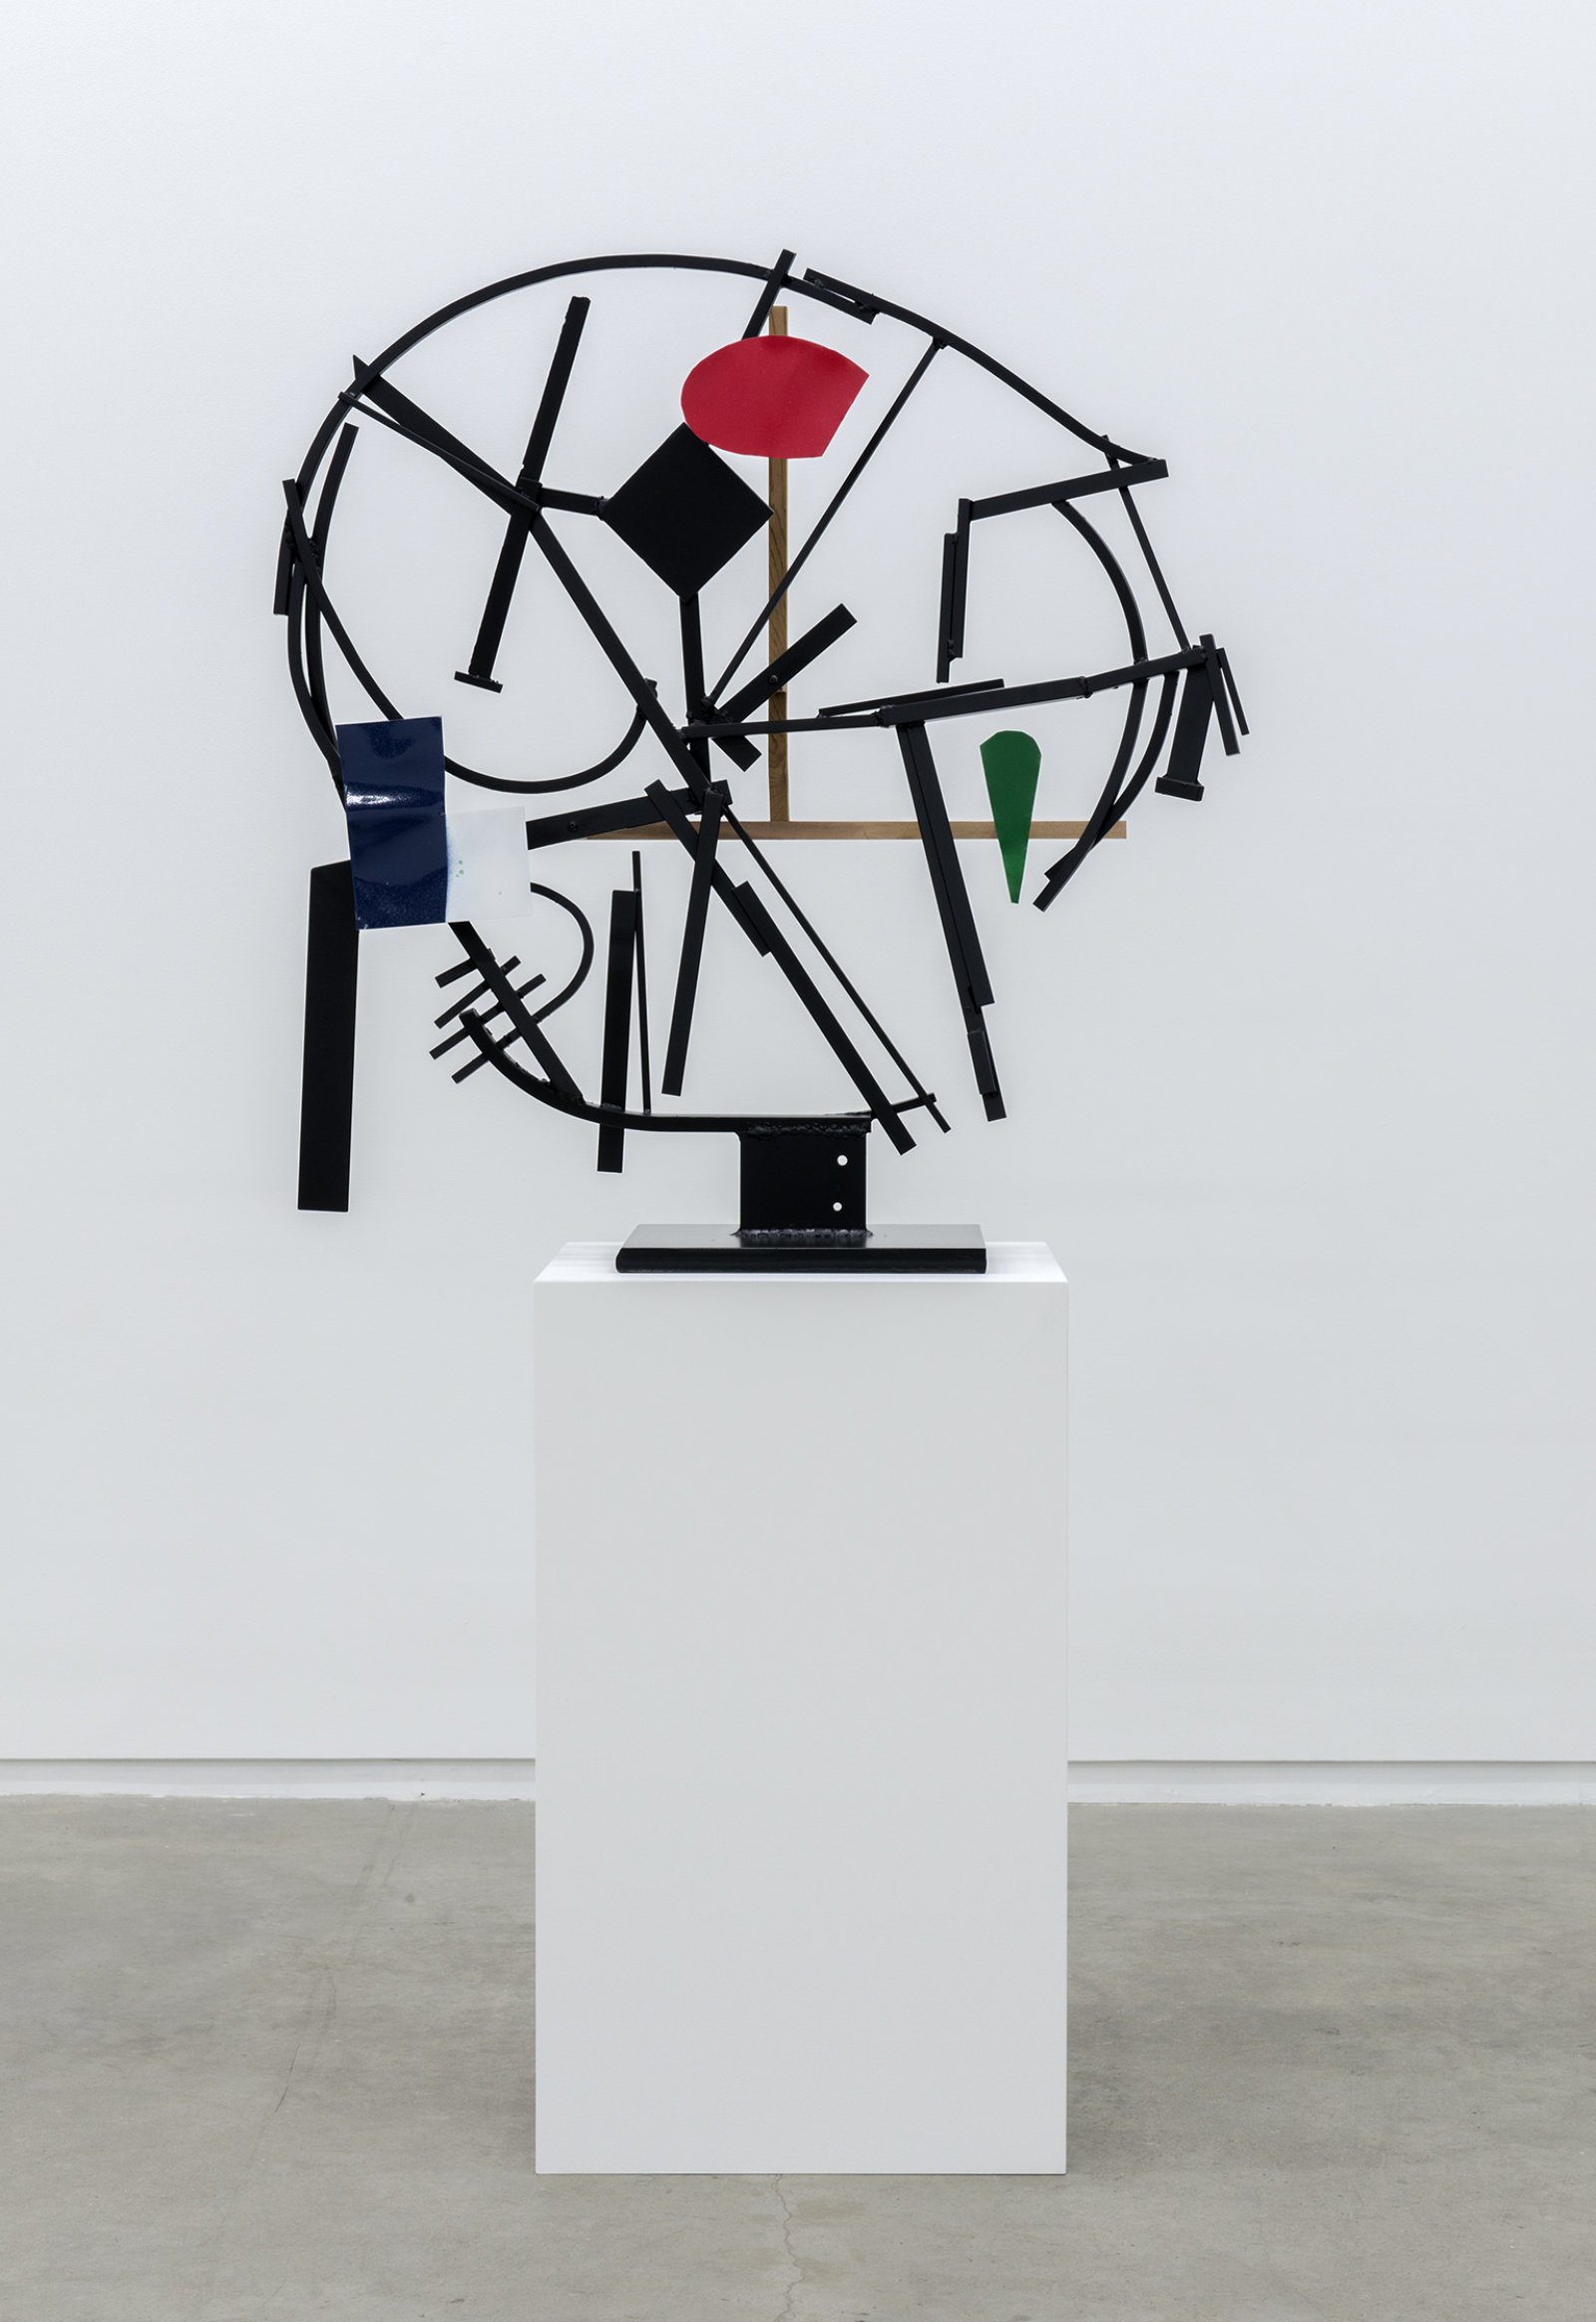 Damian Moppett, Timeless Clock Abstraction, 2013, paint, steel, wood, 73 x 39 x 18 in. (186 x 99 x 46 cm)  